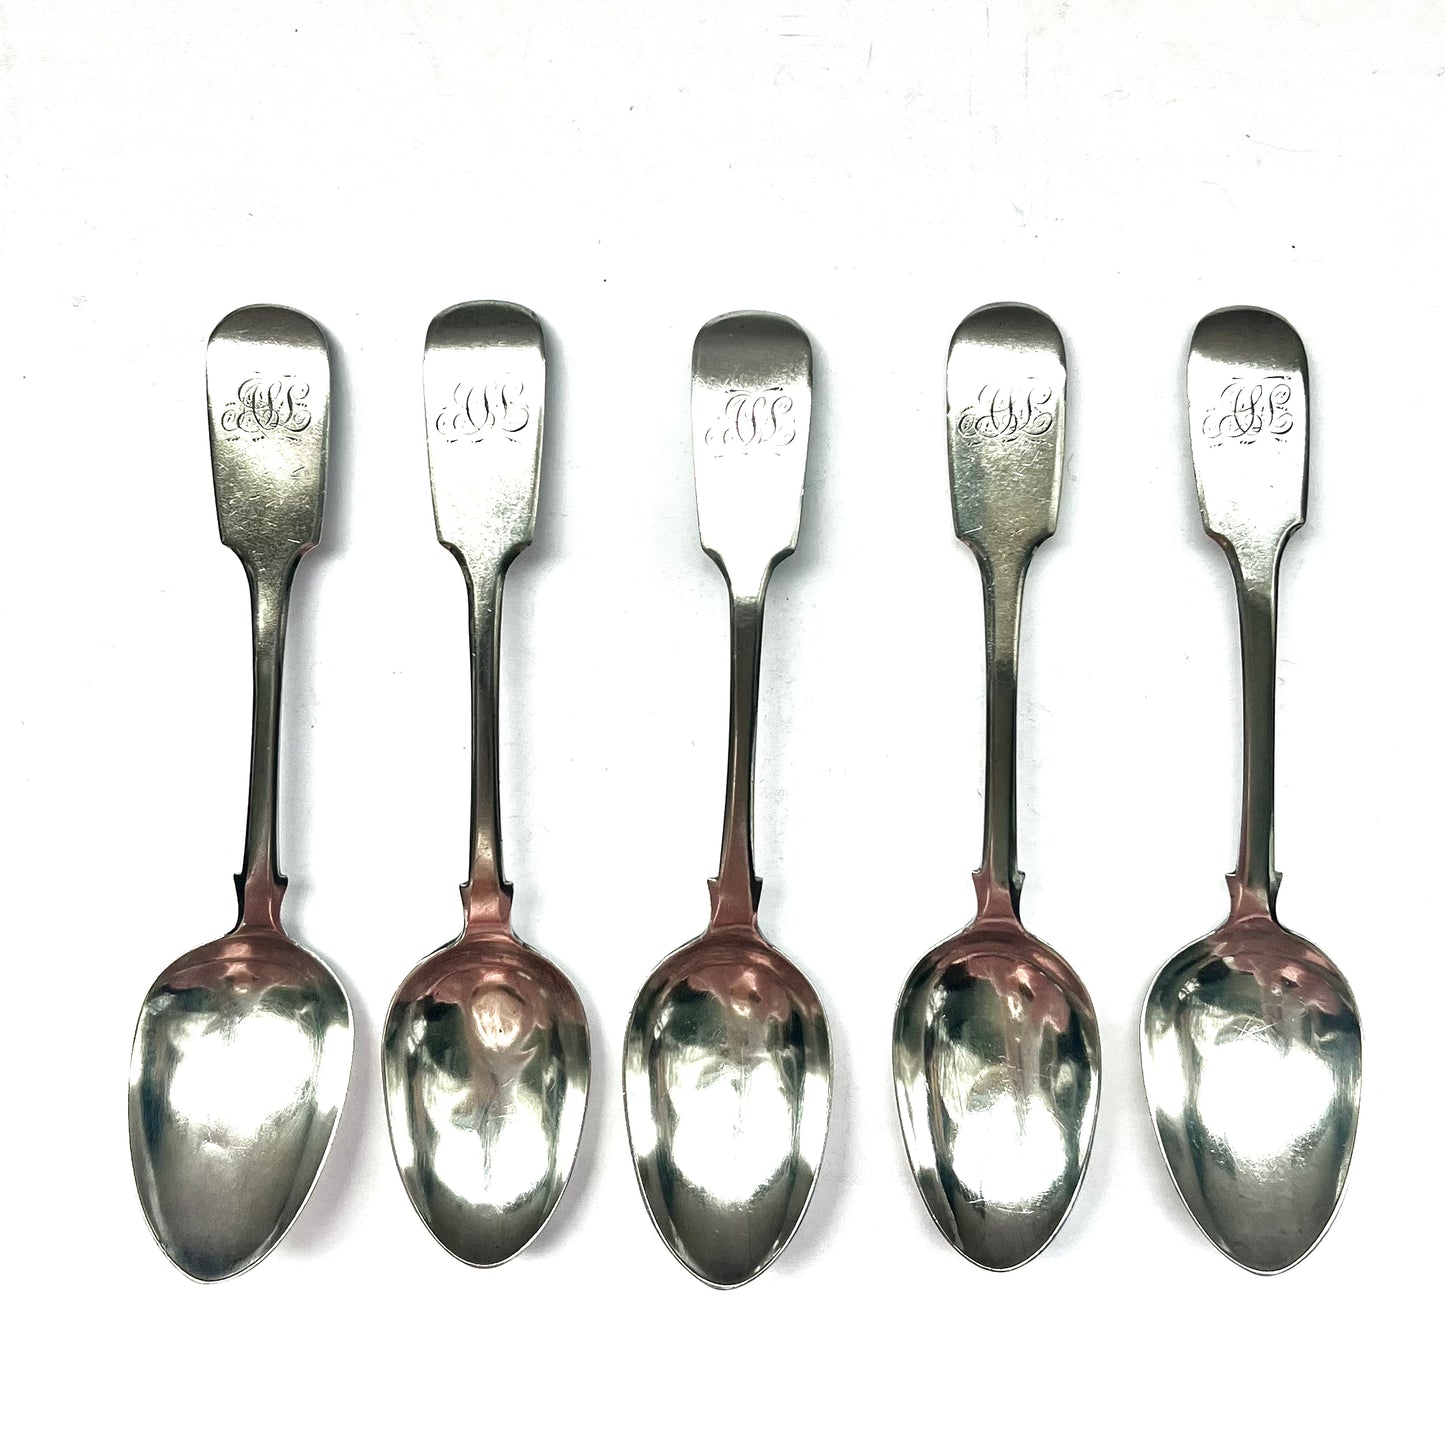 5 early Victorian English provincial silver spoons with marks for Josiah Gregory, Exeter, 1845